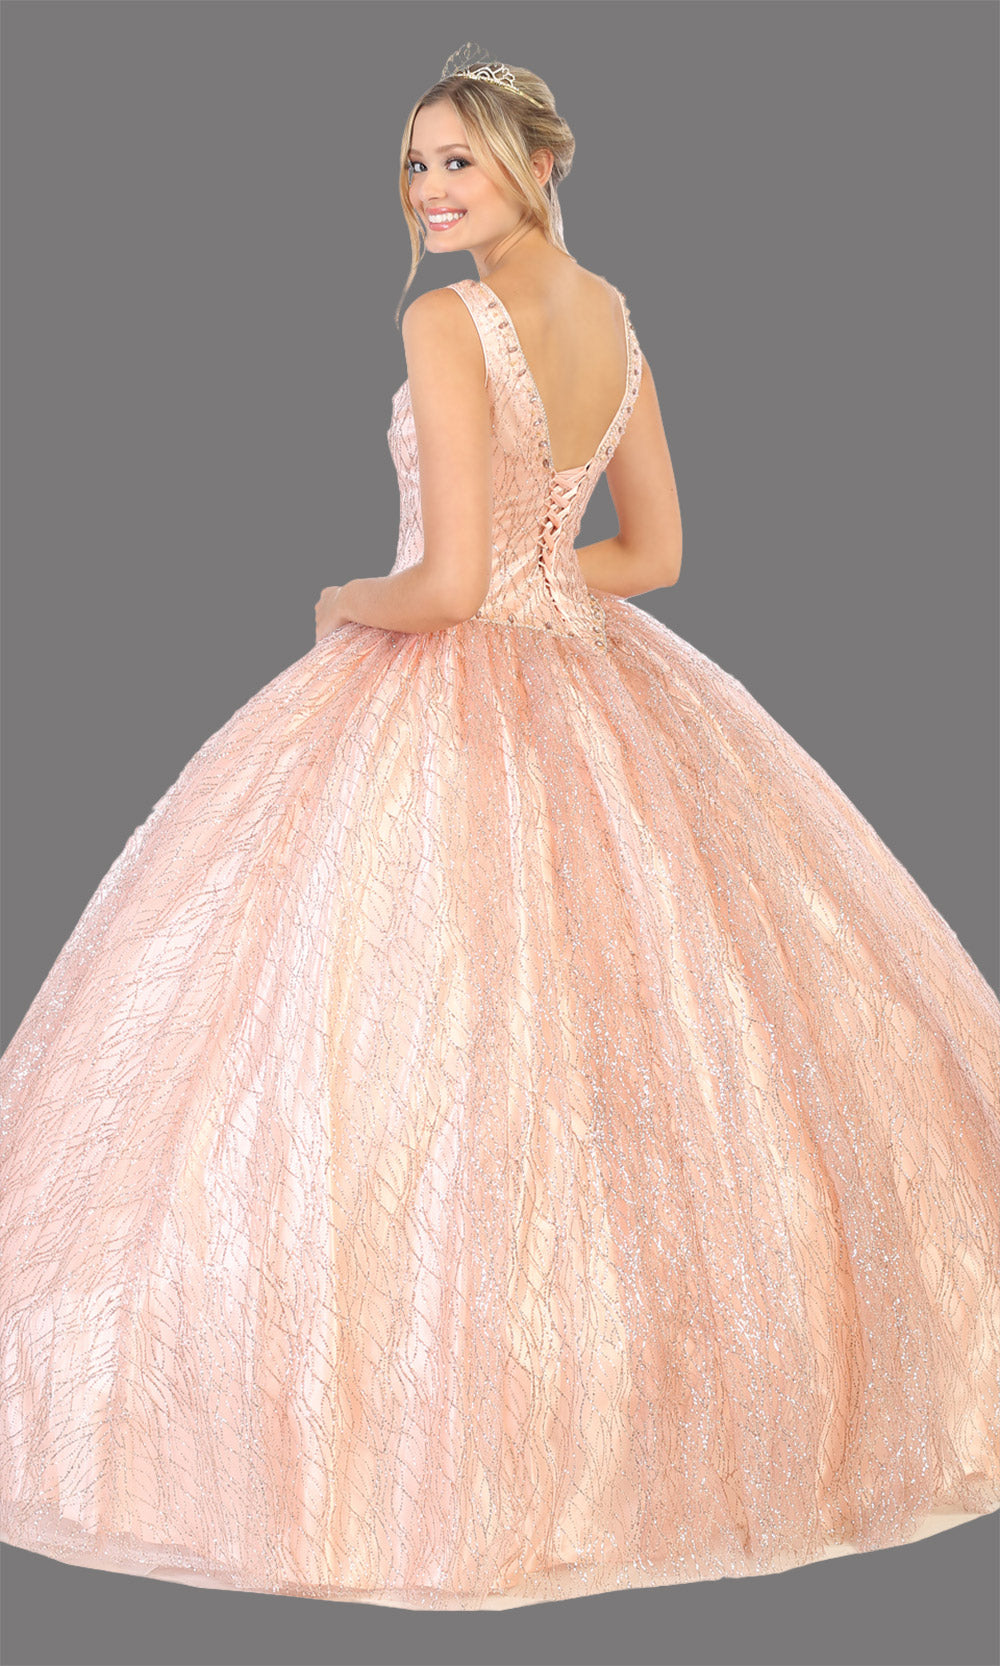 Mayqueen LK134 rose gold quinceanera v neck ball gown w/sequin detail. Rose gold ball gown is perfect for engagement dress, wedding reception, indowestern party gown, sweet 16, debut, sweet 15, sweet 18. Plus sizes available for ballgowns-b.jpg